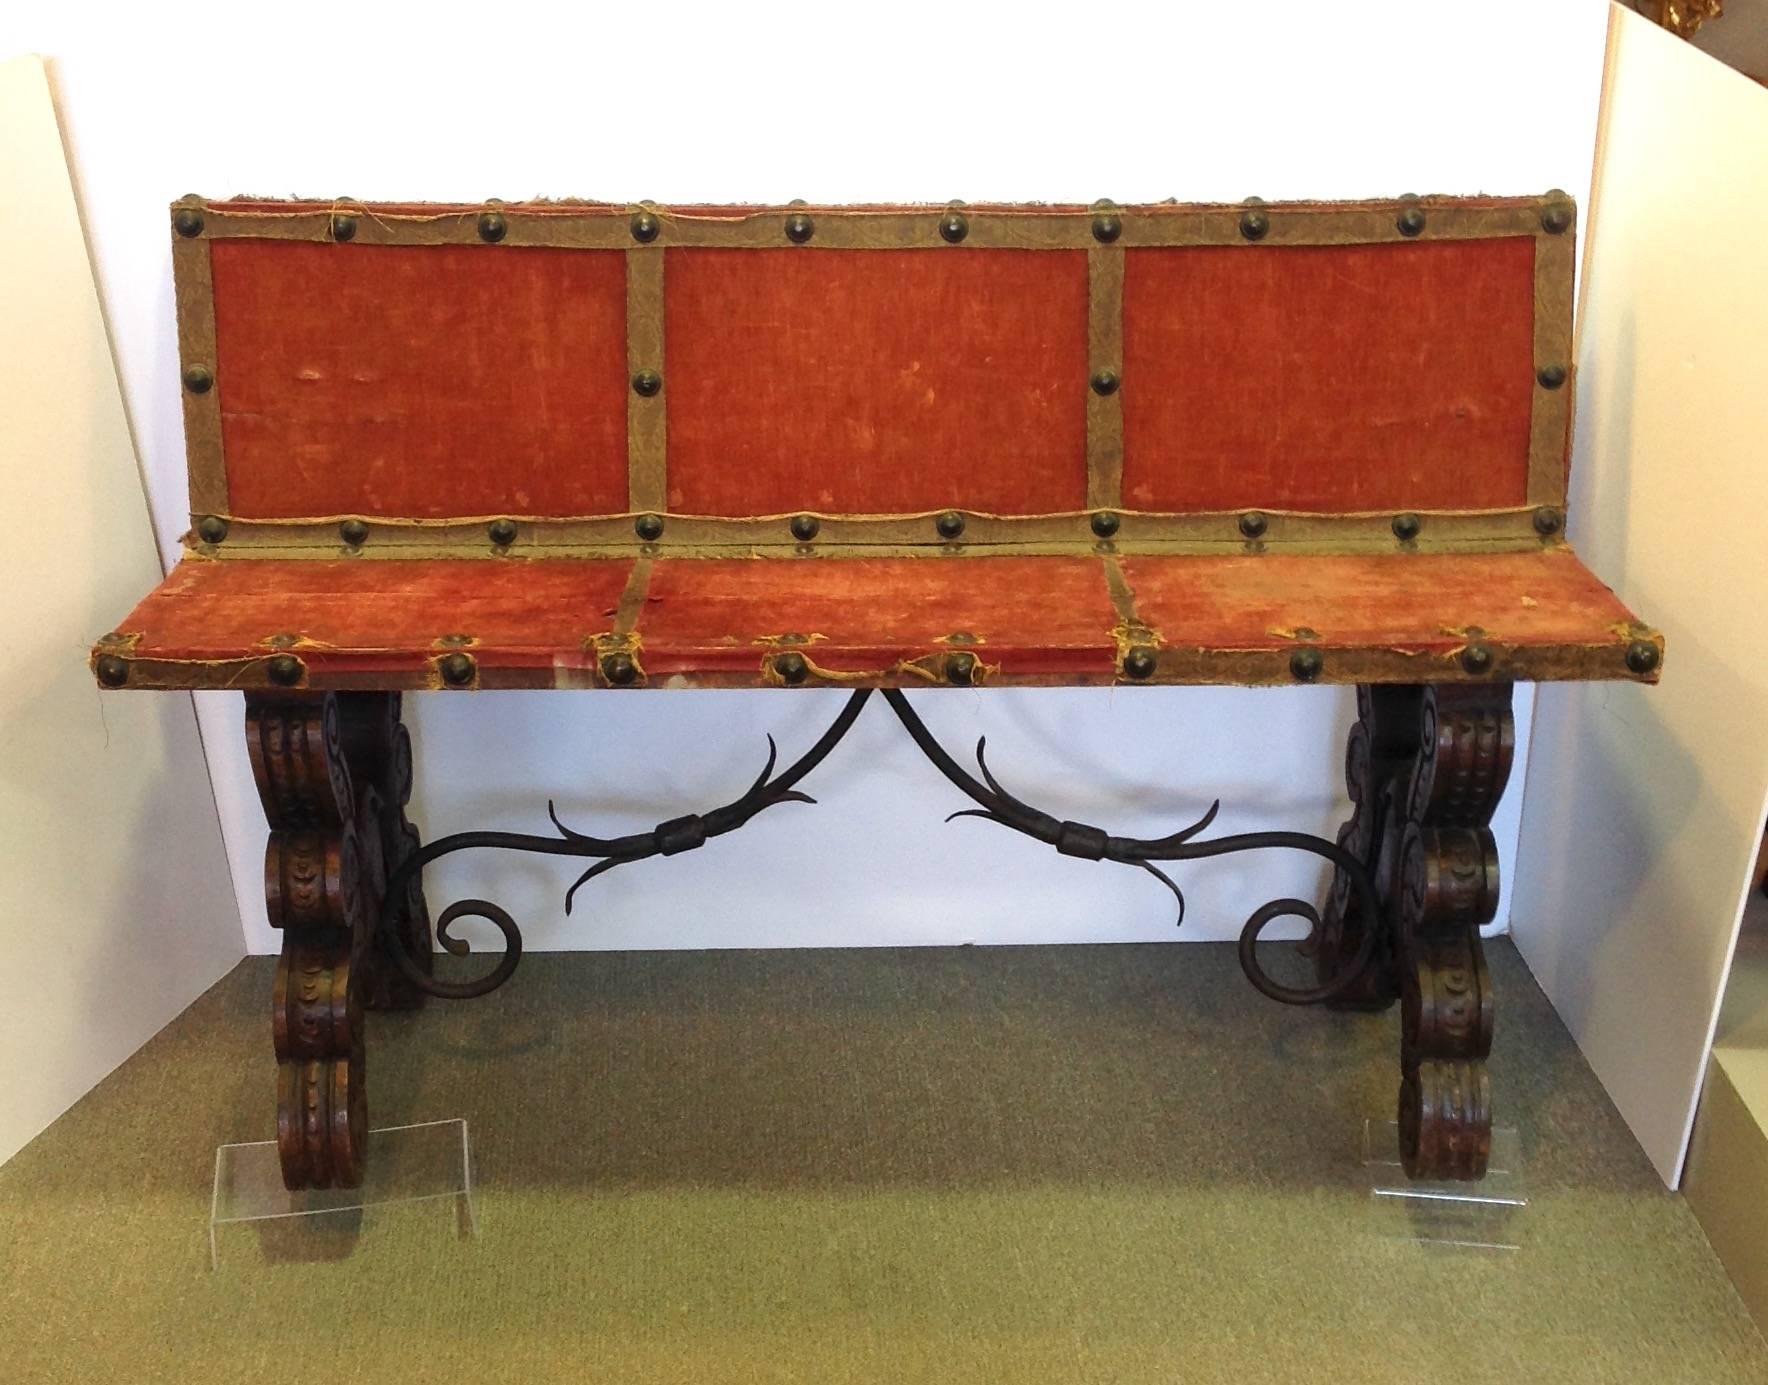 Antique Spanish hall bench with an iron ornamental stretcher, red velvet seat and carved wooden legs. Made in Spain.Circa 19th century.